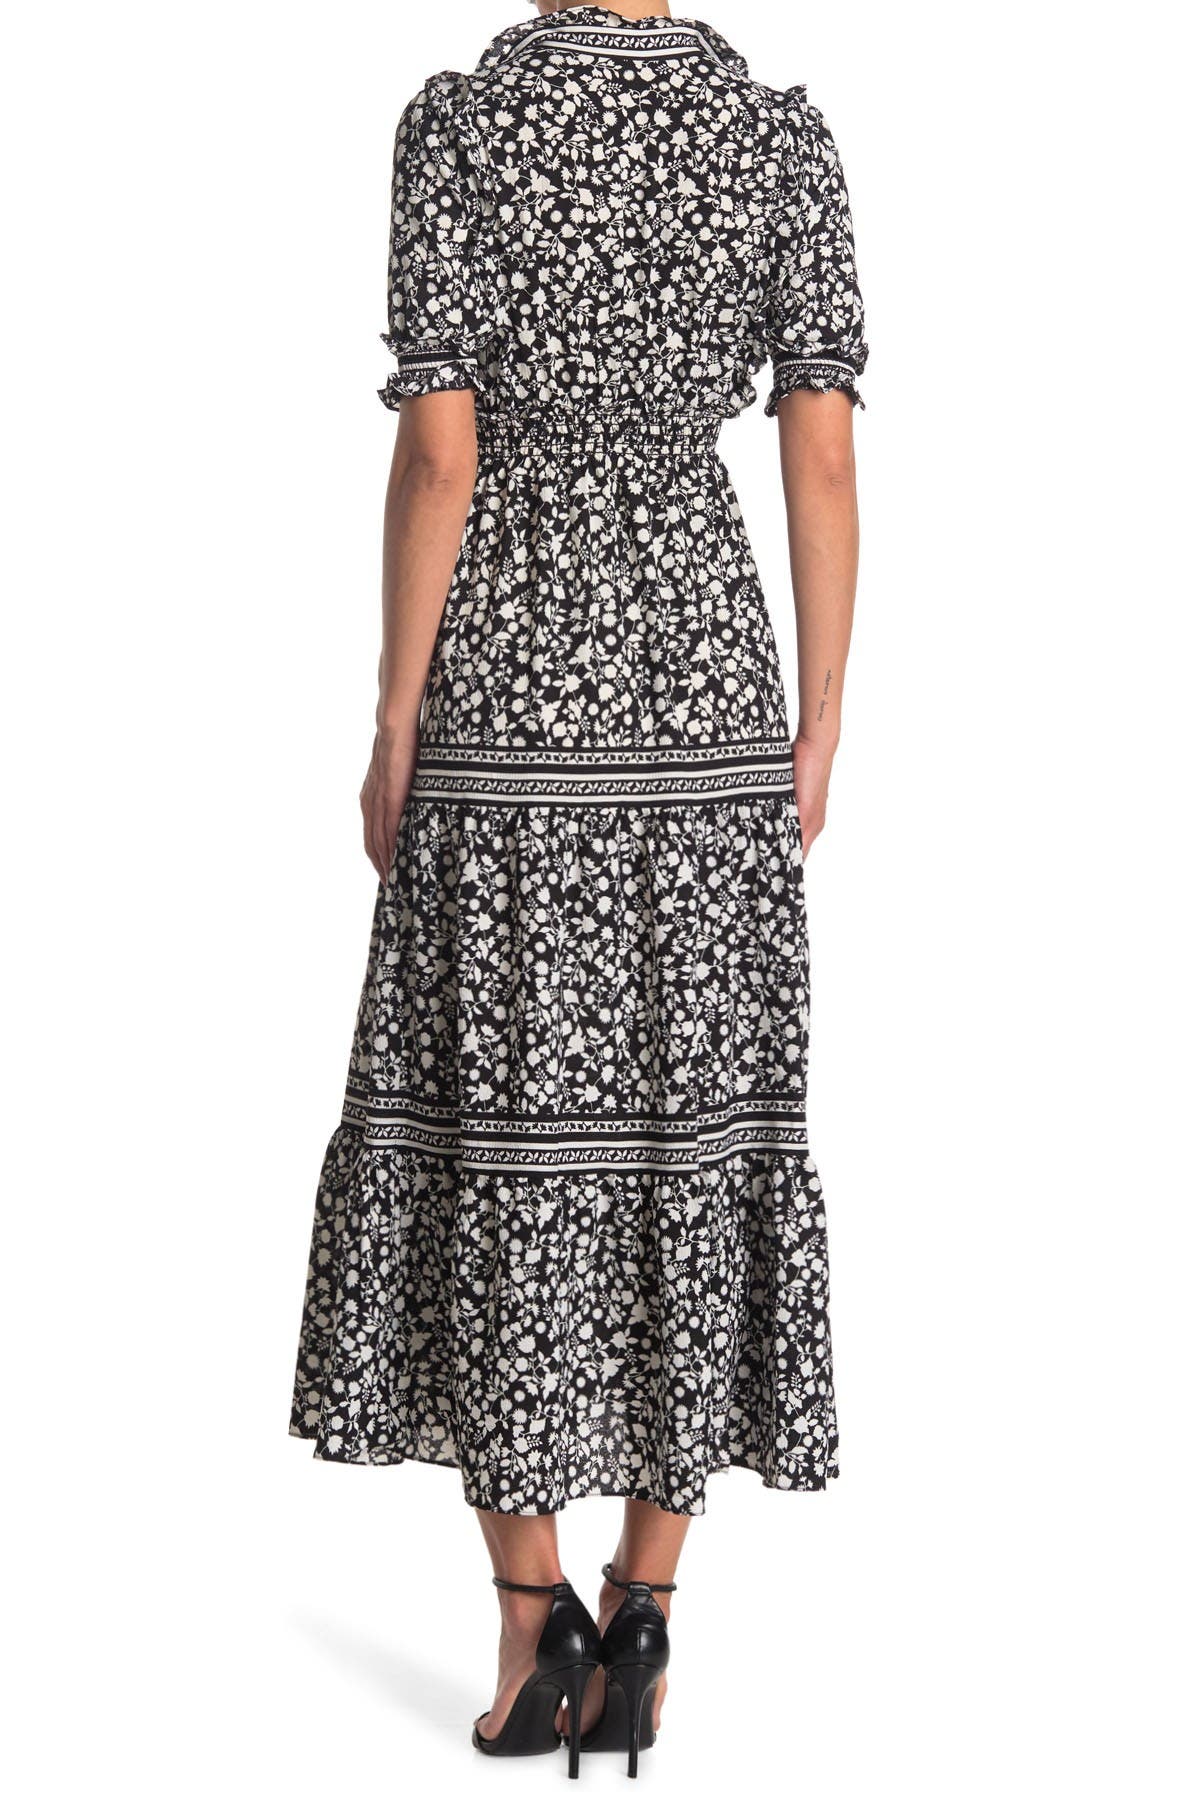 Max Studio Elbow Length Sleeve Print Tiered Maxi Dress In Charcoal3